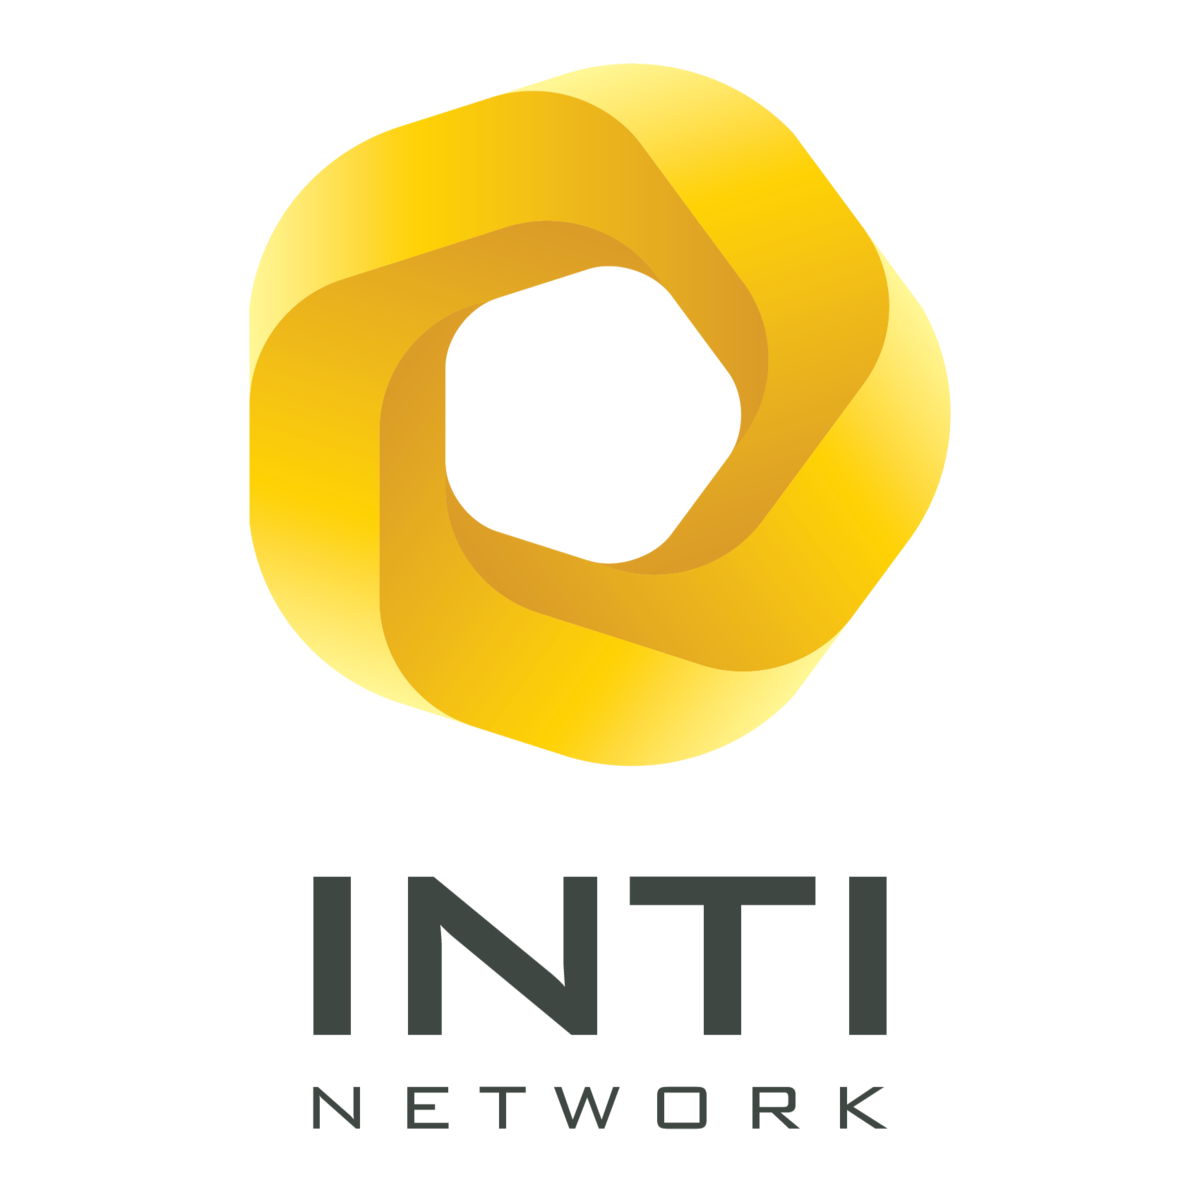 Canal INTI Network TV